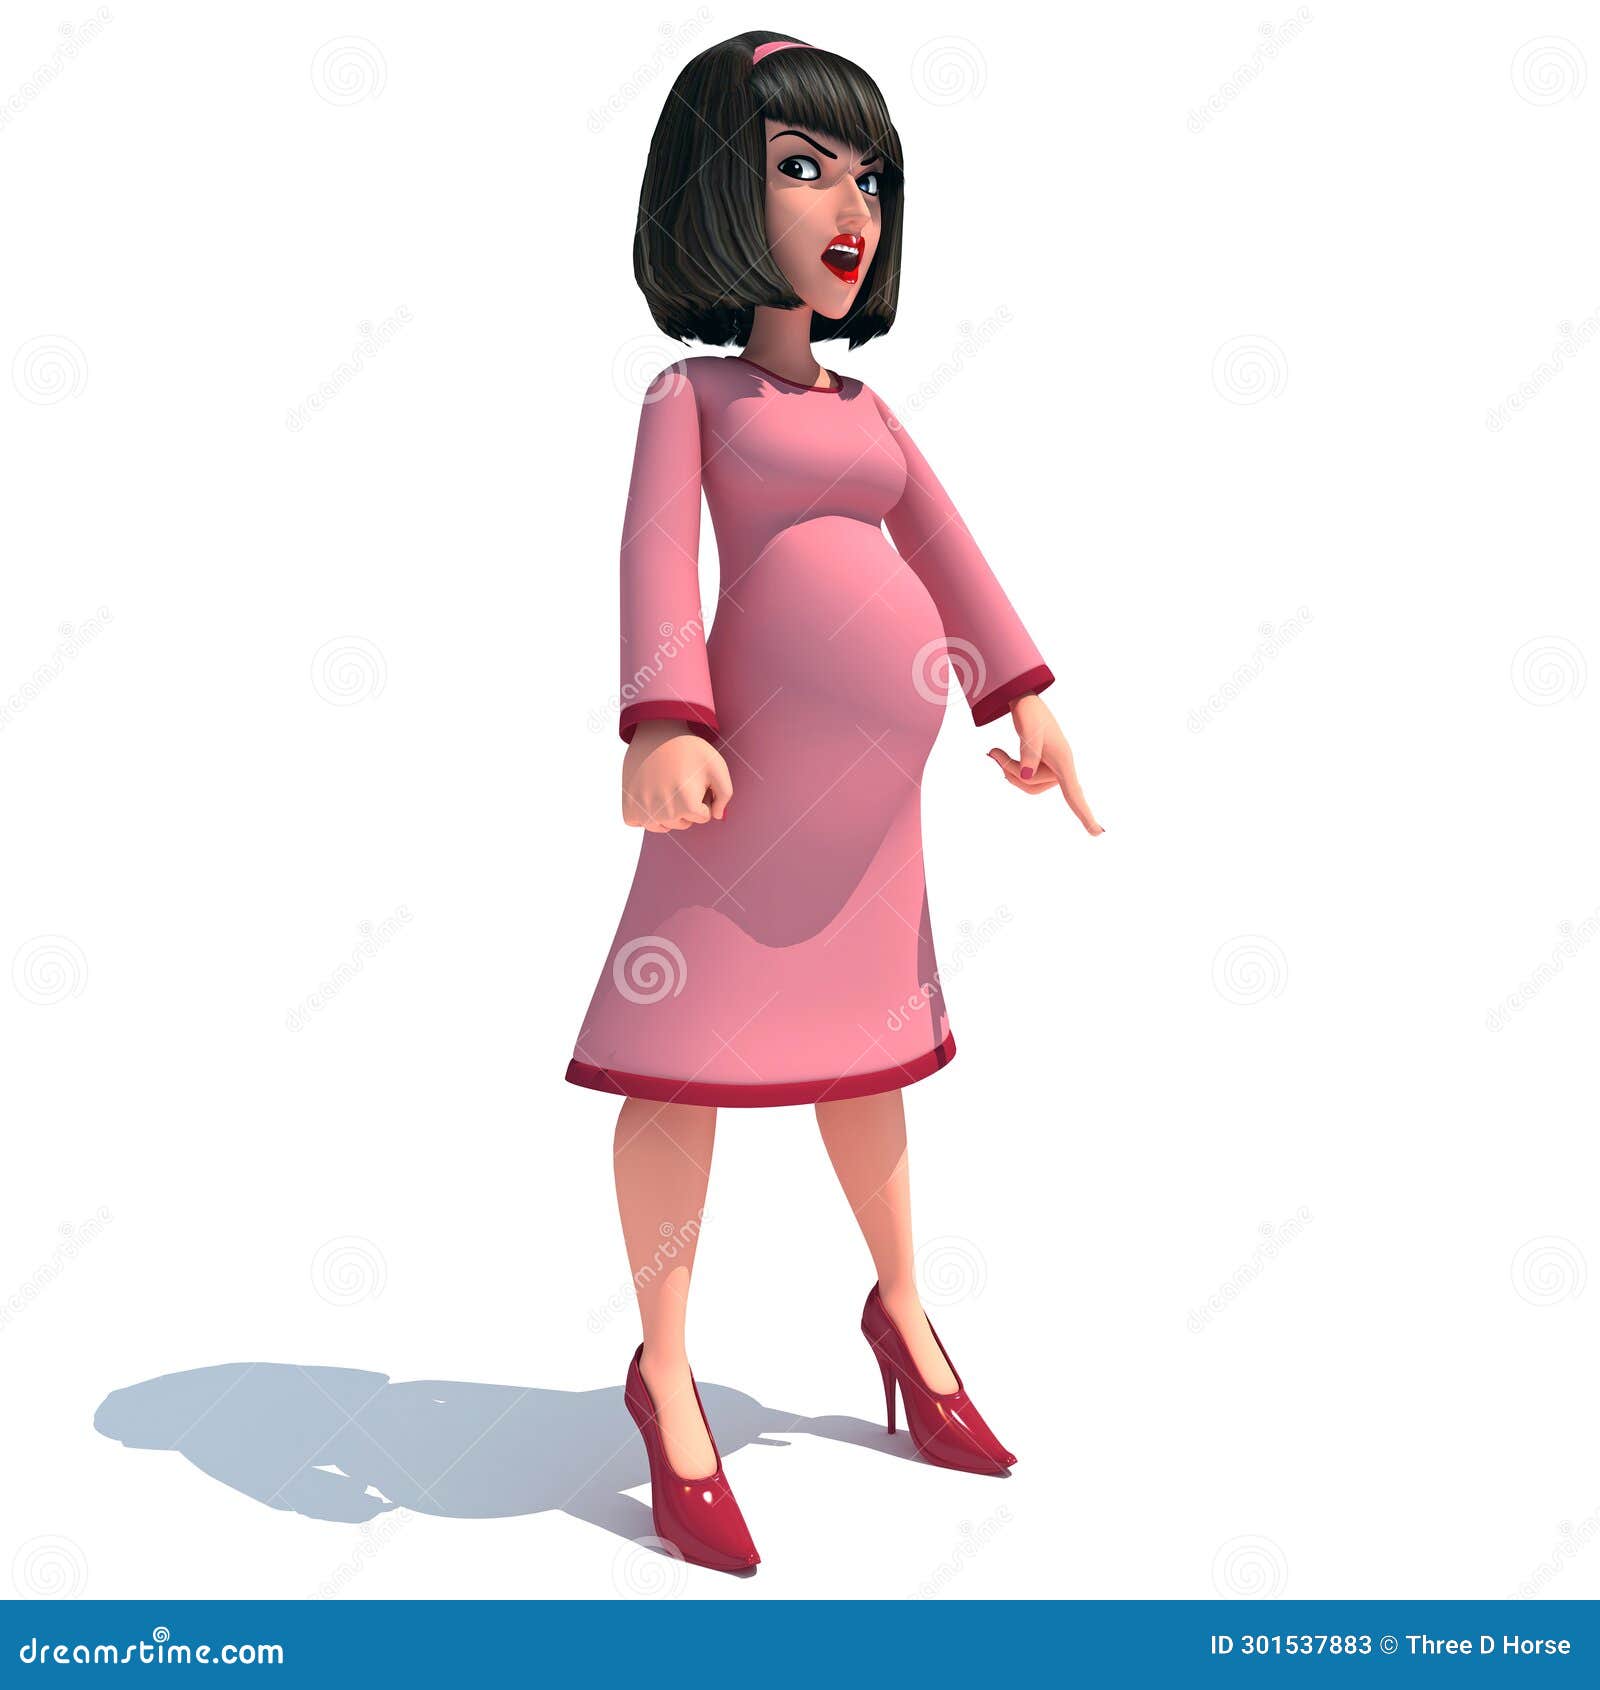 30,006 Pregnant Woman Cartoon Images, Stock Photos, 3D objects